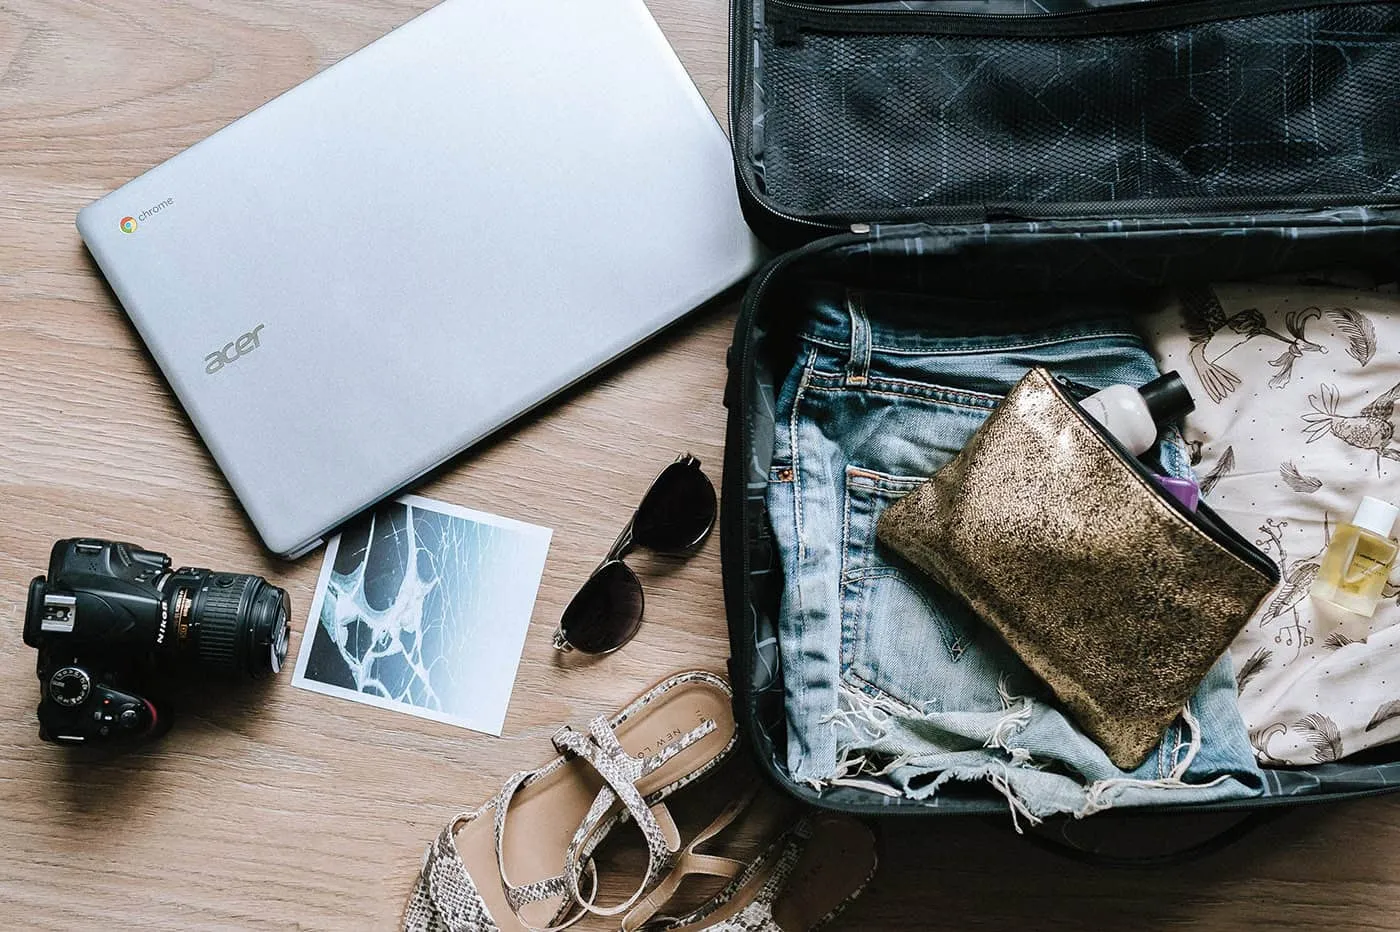 Ultimate Road Trip Packing List: What to Pack For a Road Trip Checklist | Hitting the road and trying to figure out what to pack for a road trip? We’ve compiled this ultimate road trip packing list to get you organized.